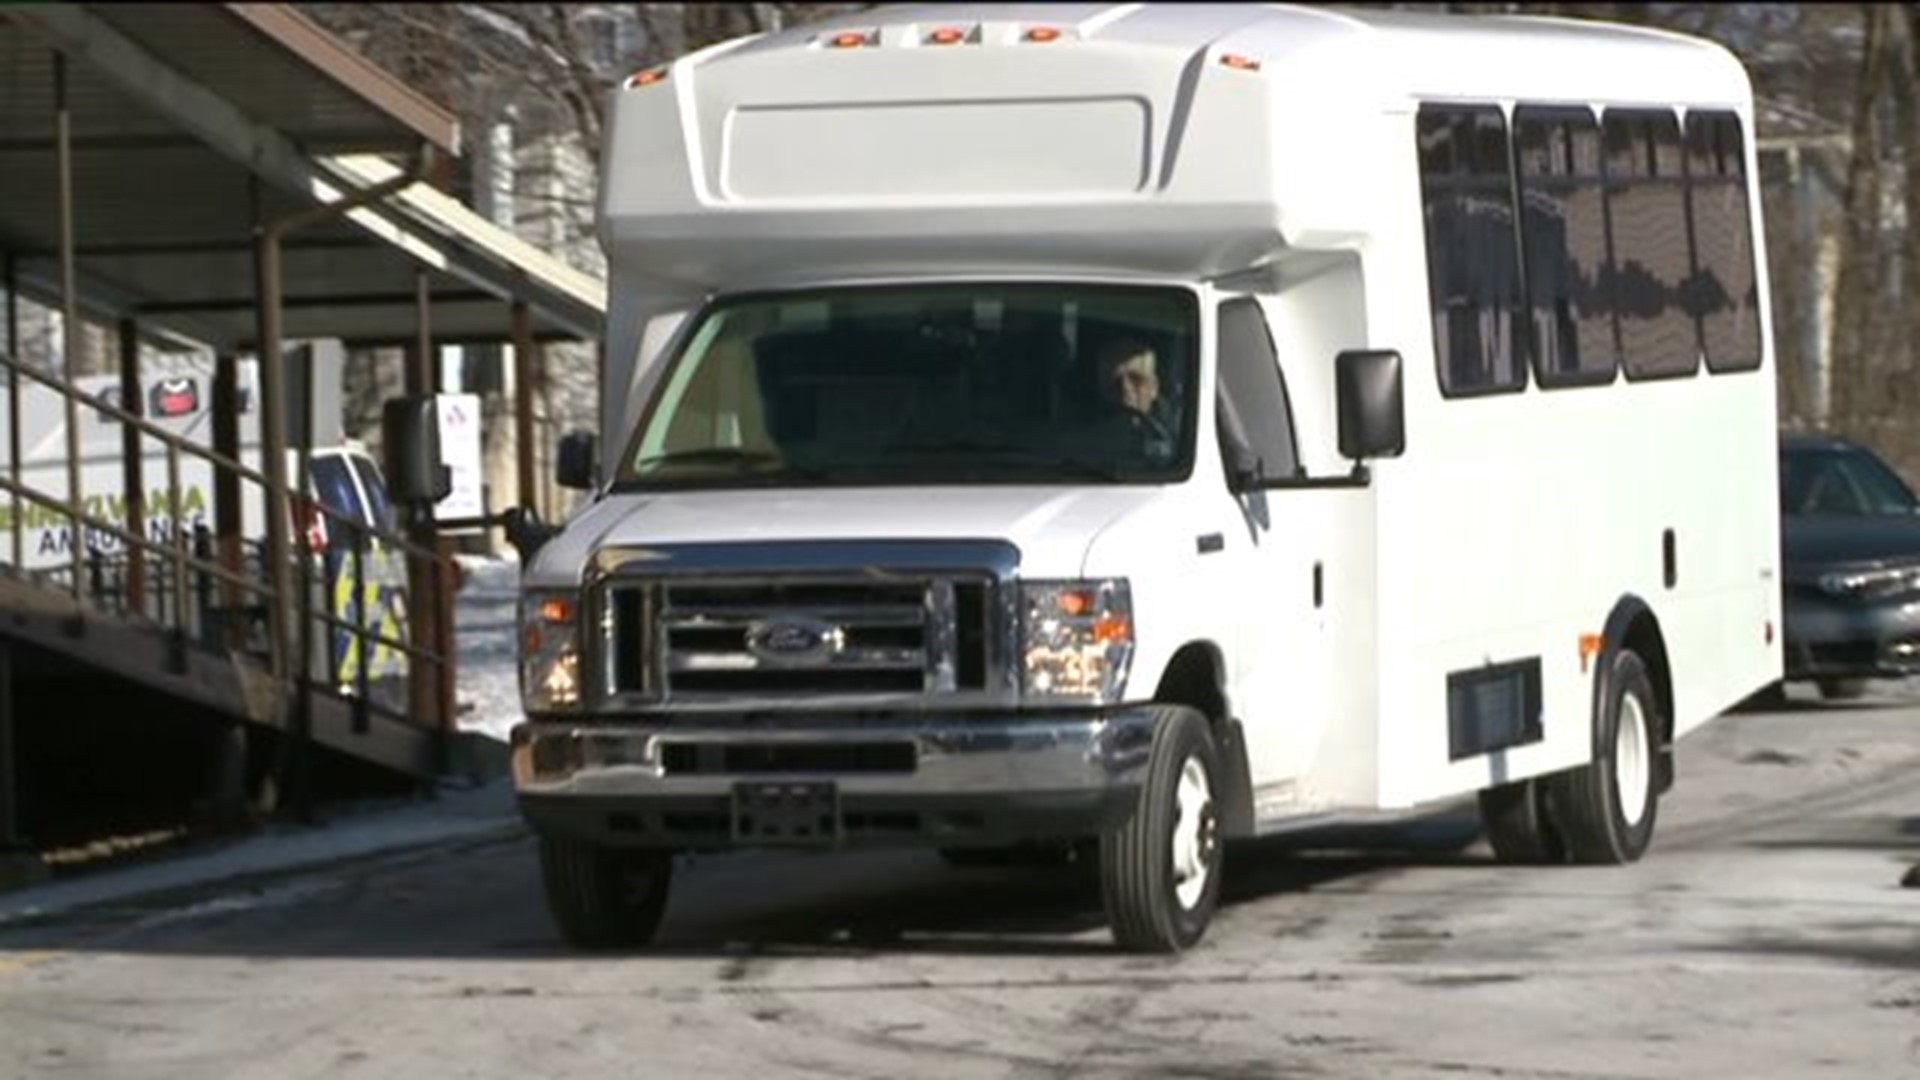 Scranton Charity Received New Bus